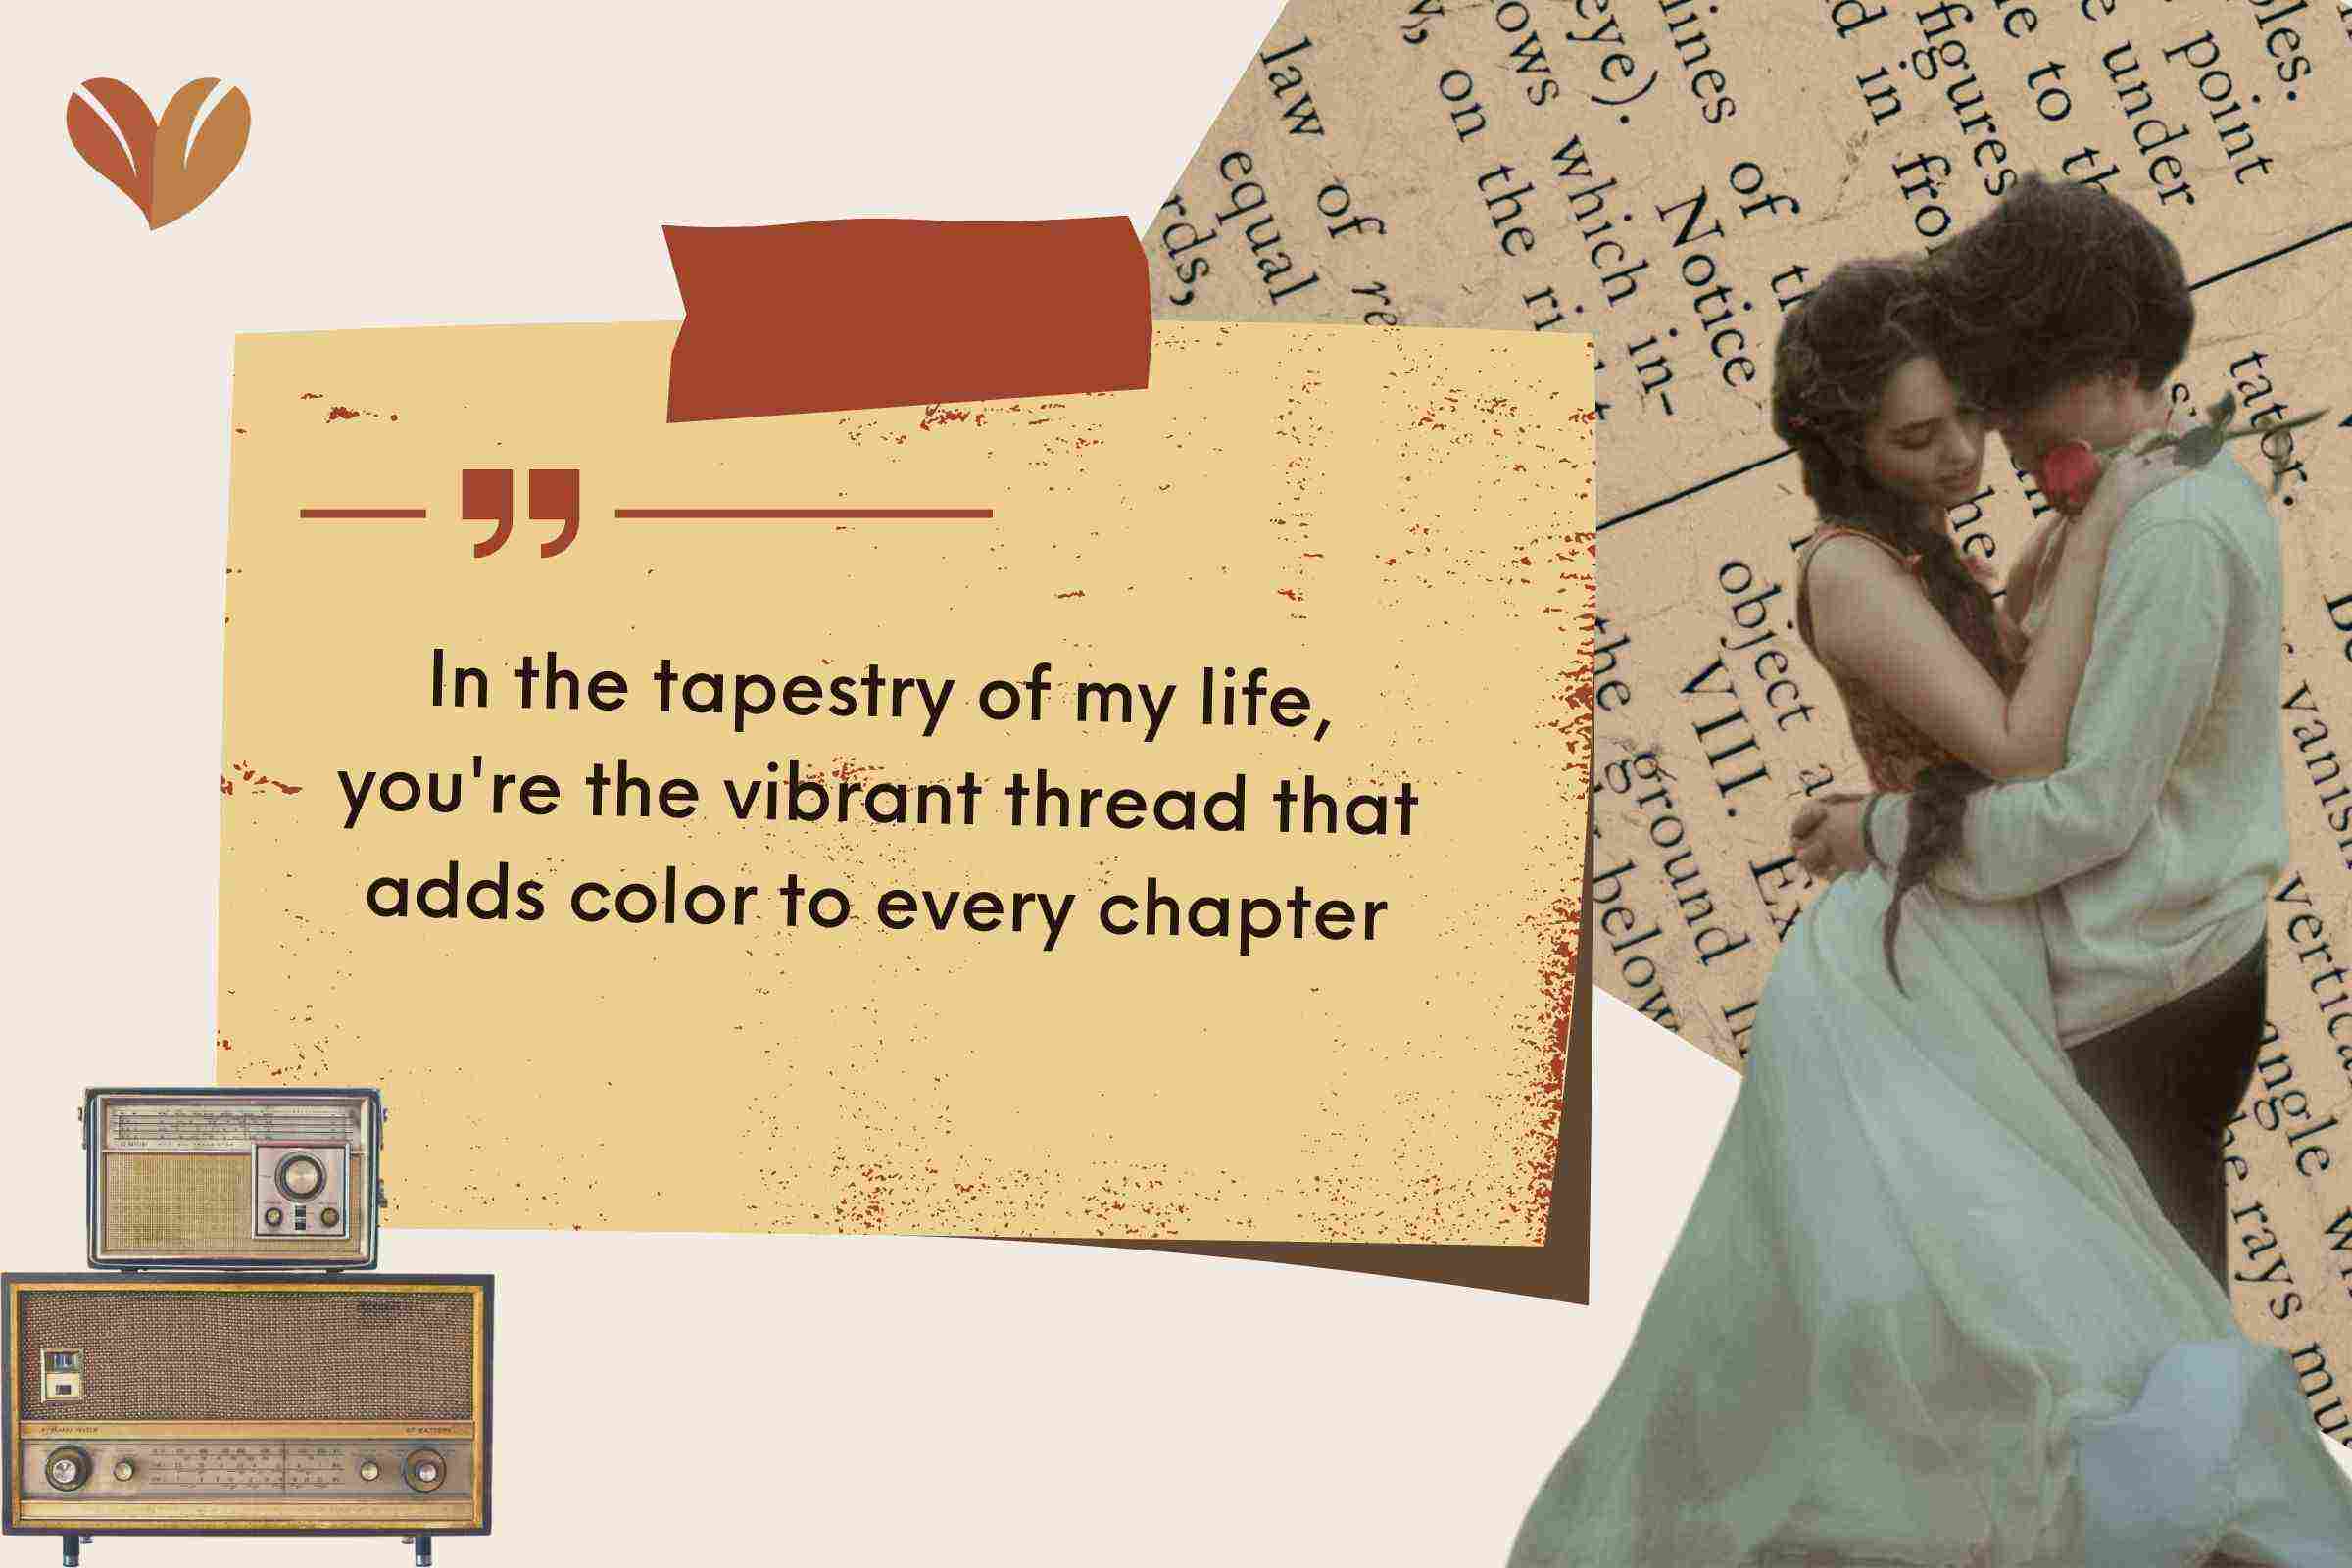 In the tapestry of my life, you're the vibrant thread that adds color to every chapter